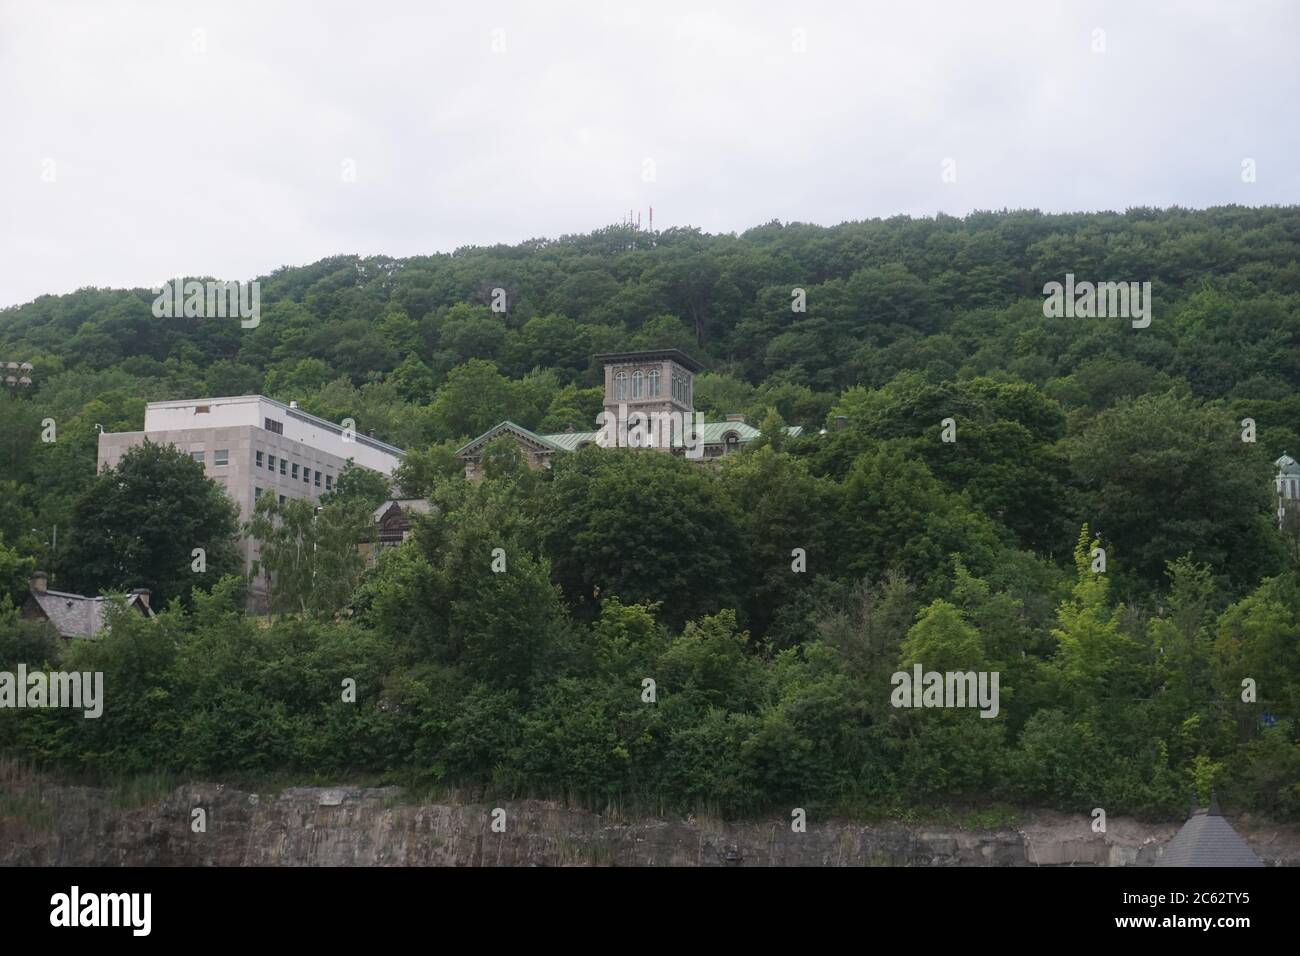 Montreal, QC/ Canada - 7/4/2020: A green mountain view. The middle is the historical building of the Allan Memorial Institute, Department of Psycholog Stock Photo